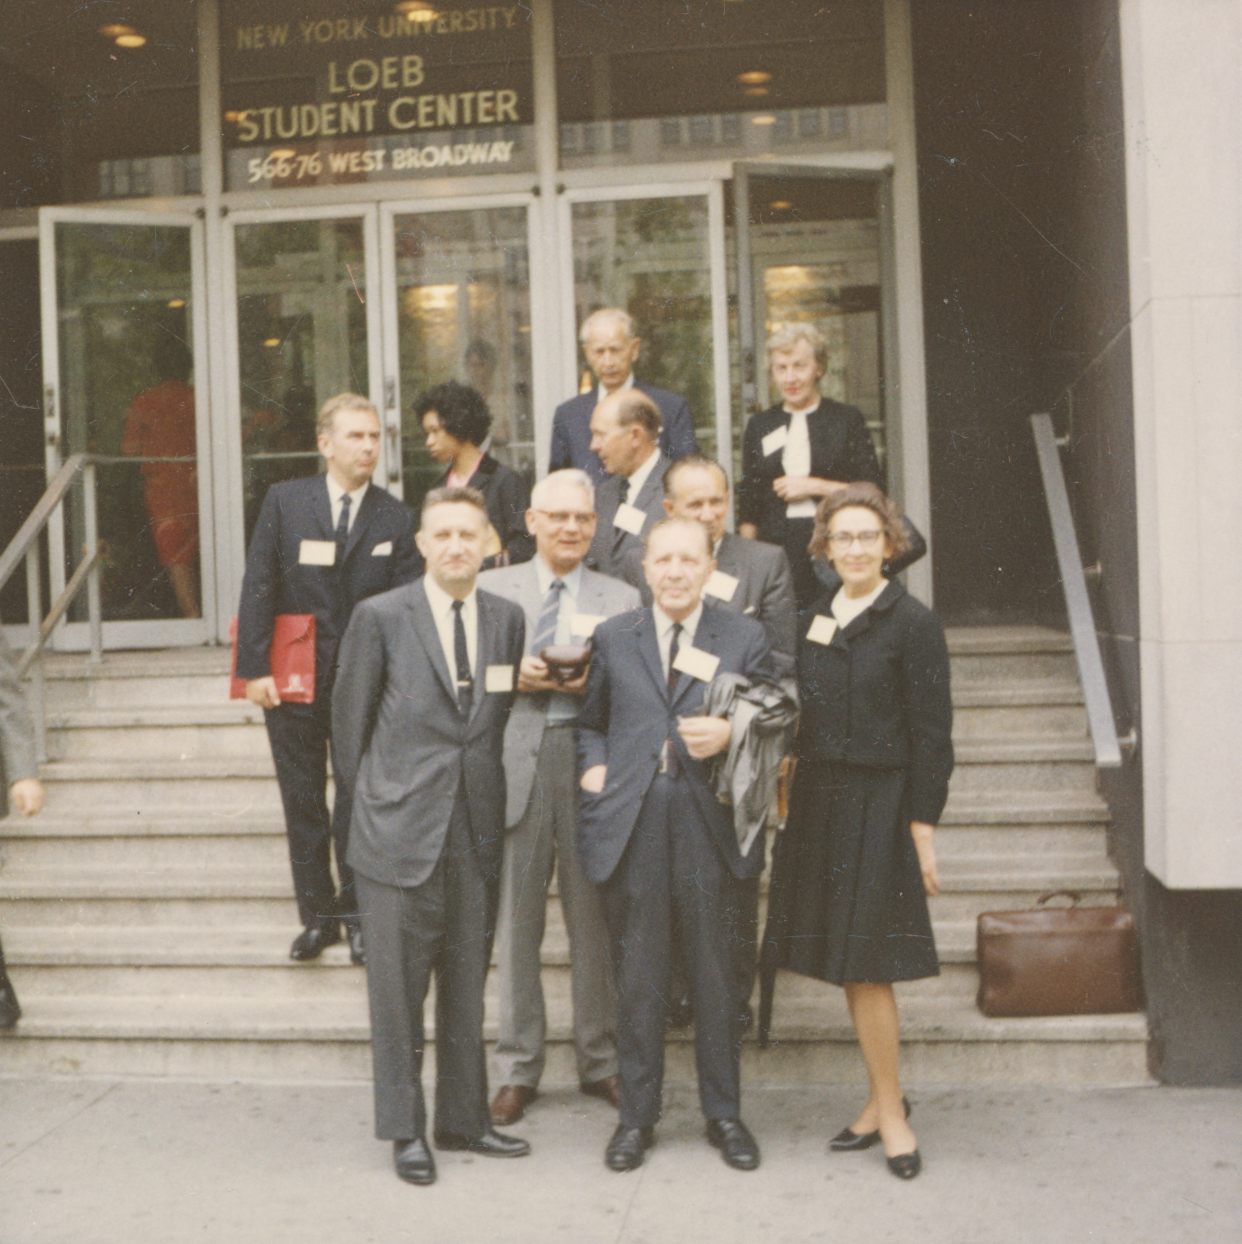 Ants Oras, Karl Ast-Rumor, Leili Ast and others at the University of New York stairs in 1965